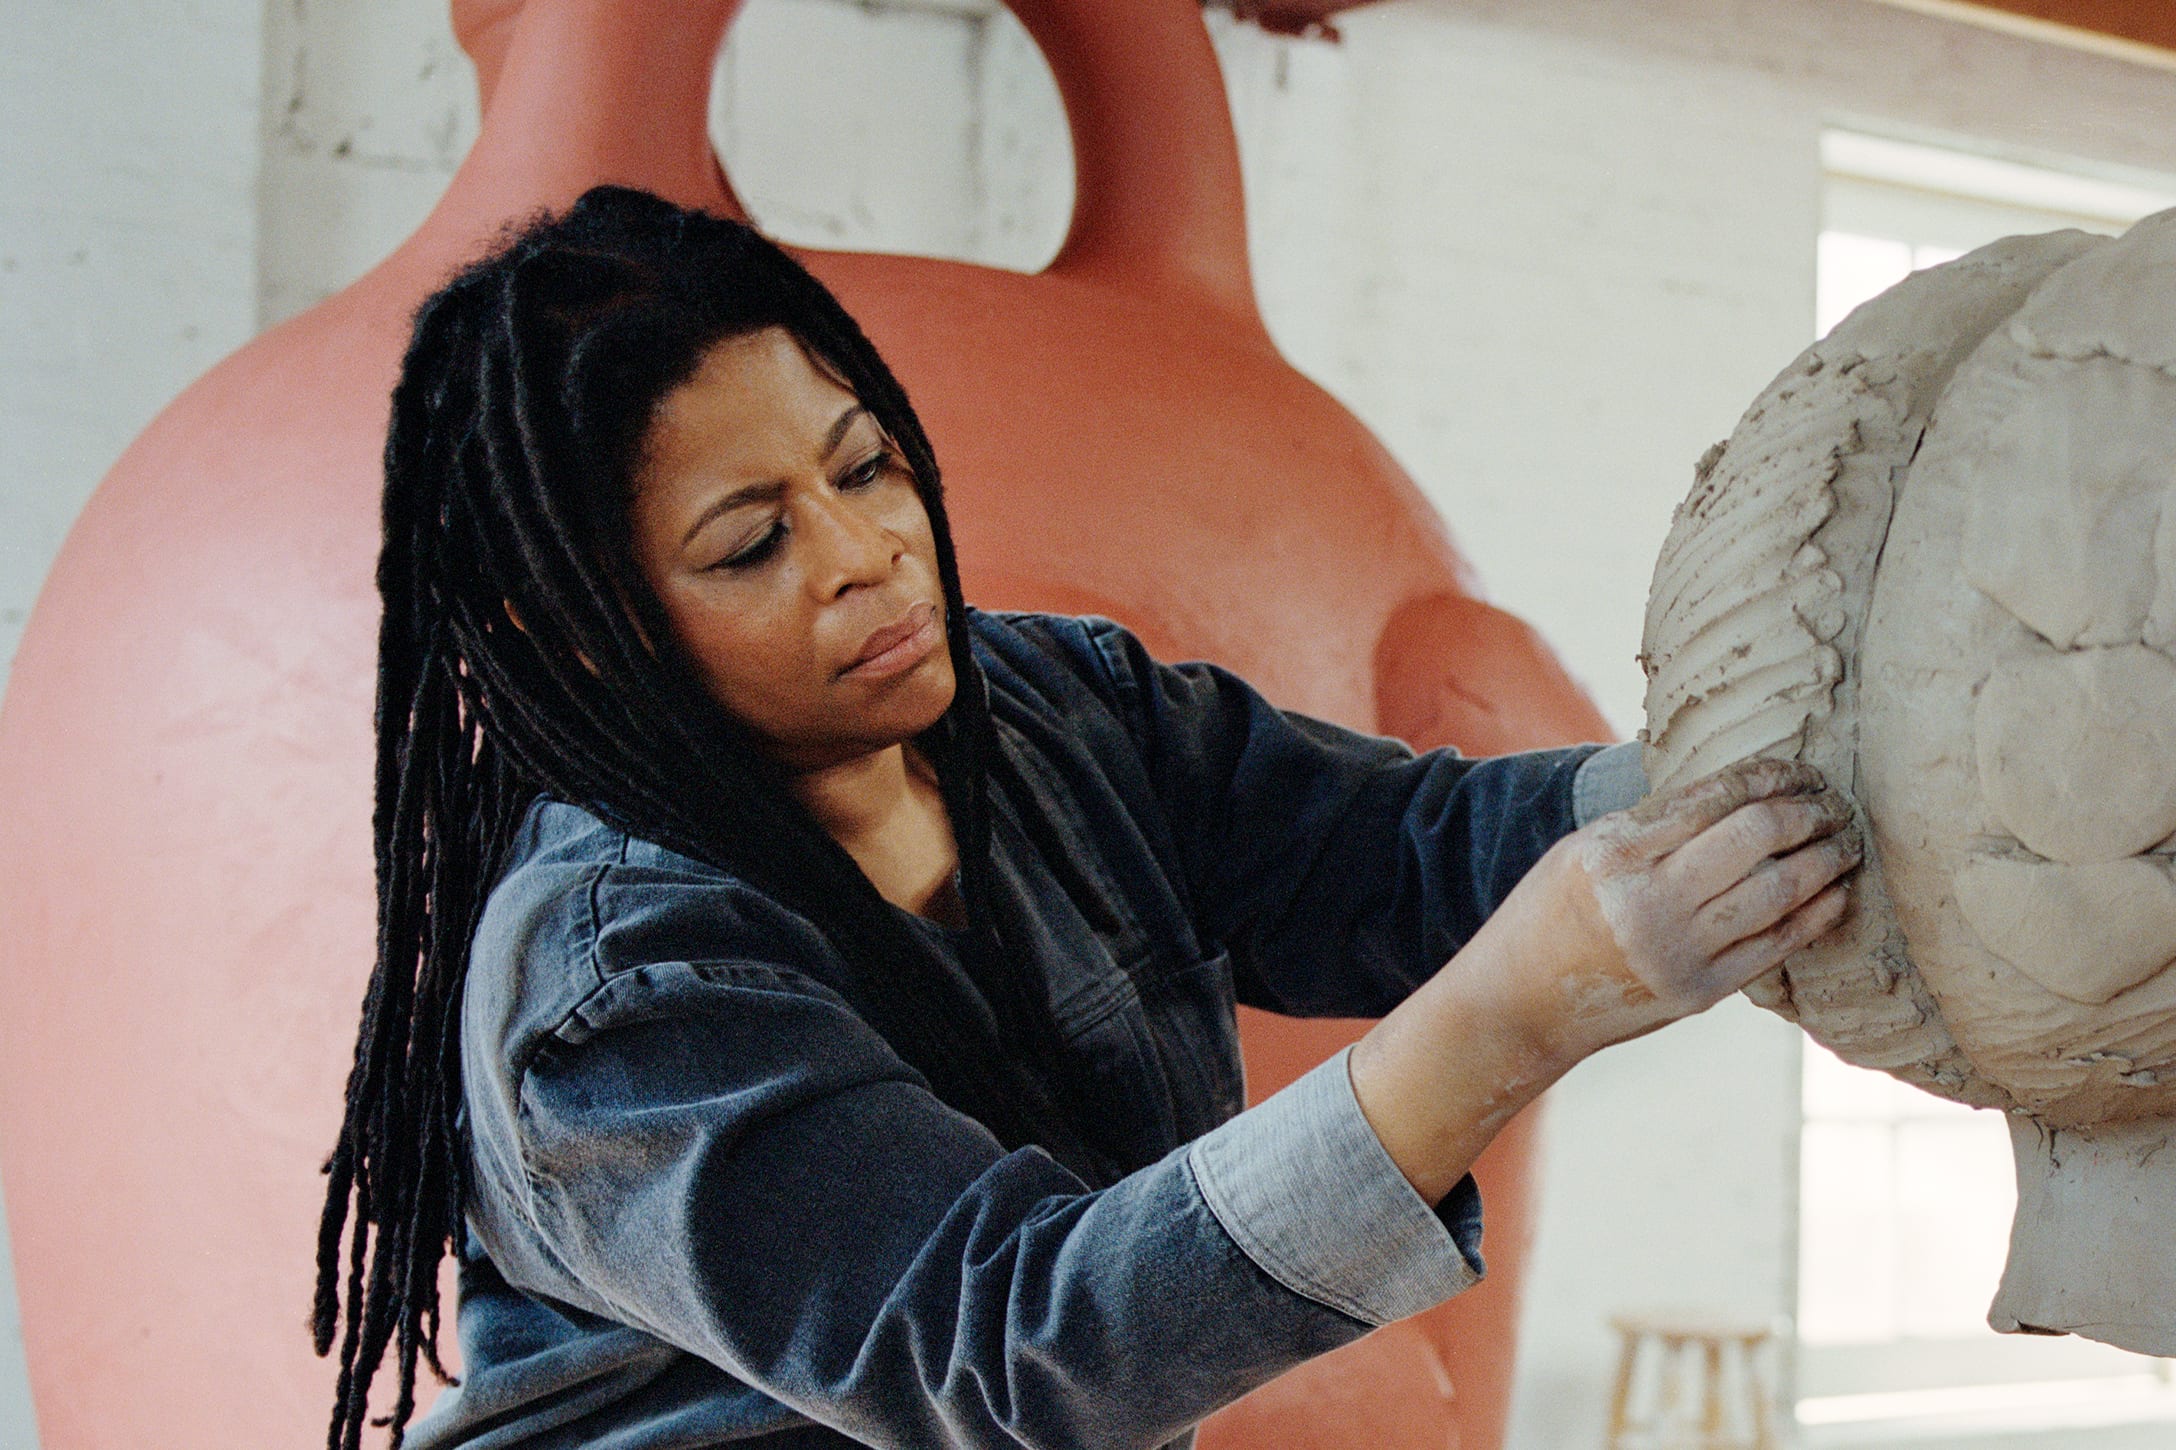 Simone Leigh, a medium-dark-skinned woman with dreadlocks working on a large clay sculpture in a denim work outfit